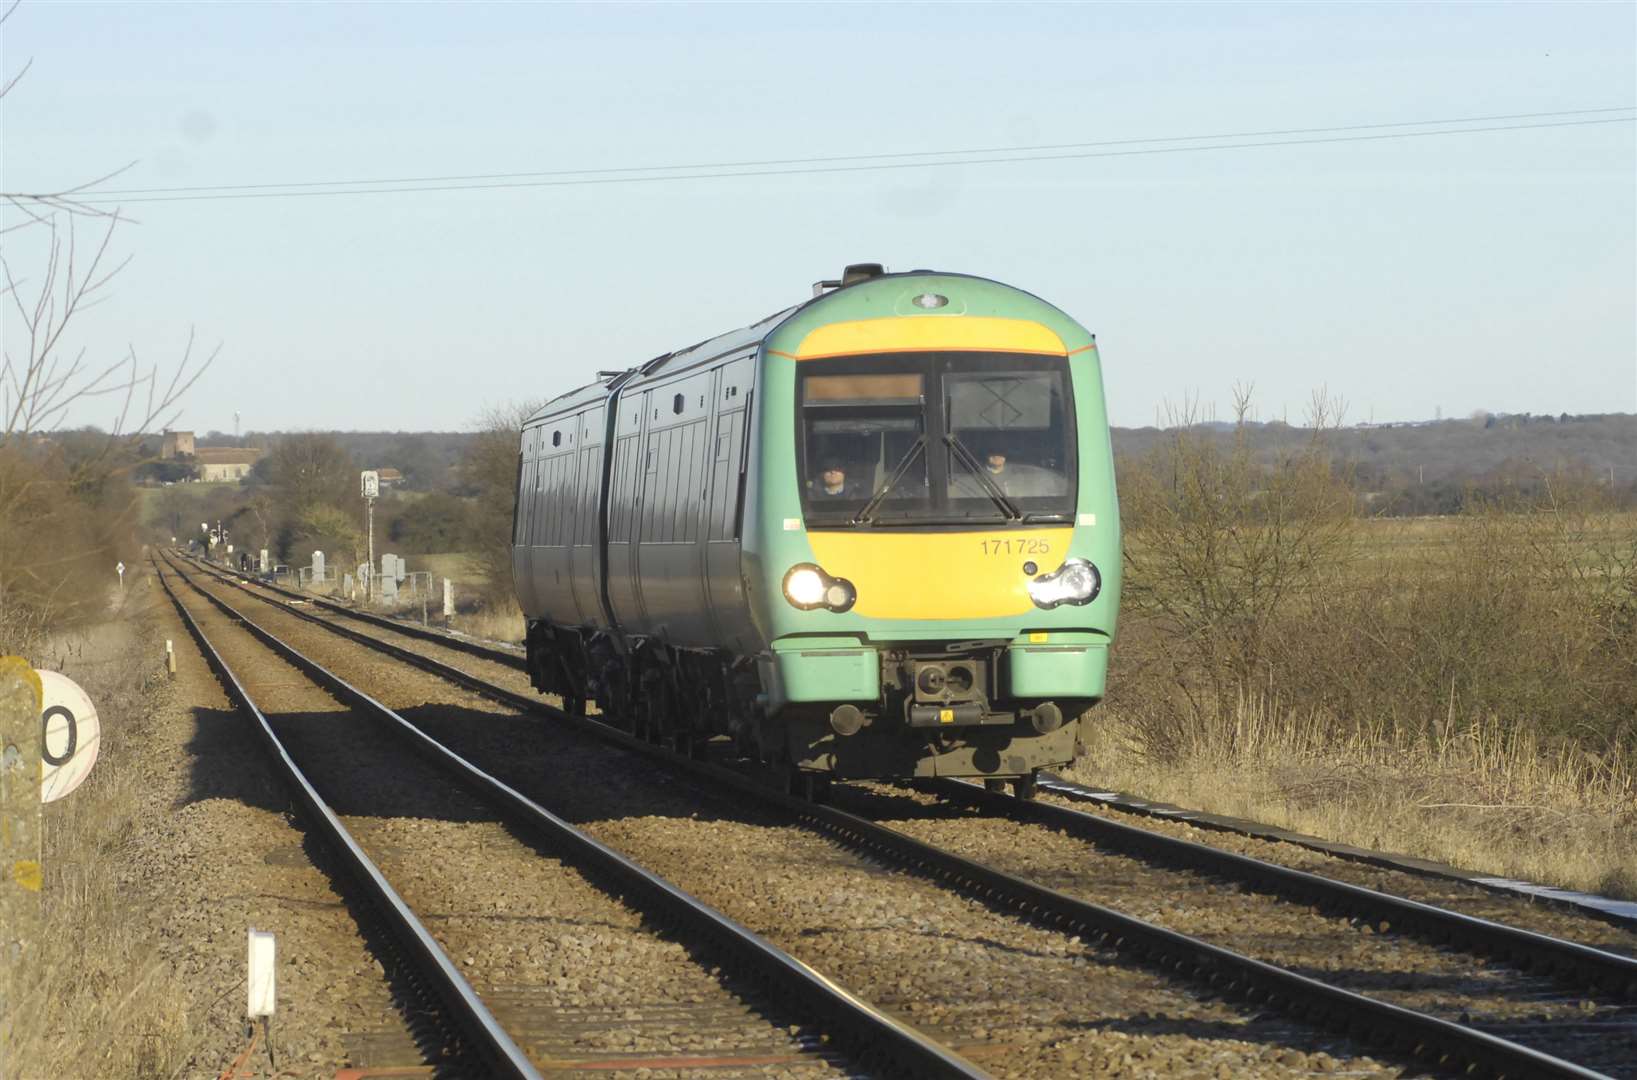 A person has been hit by a train on the Southern Railway line, which serves Ashford International